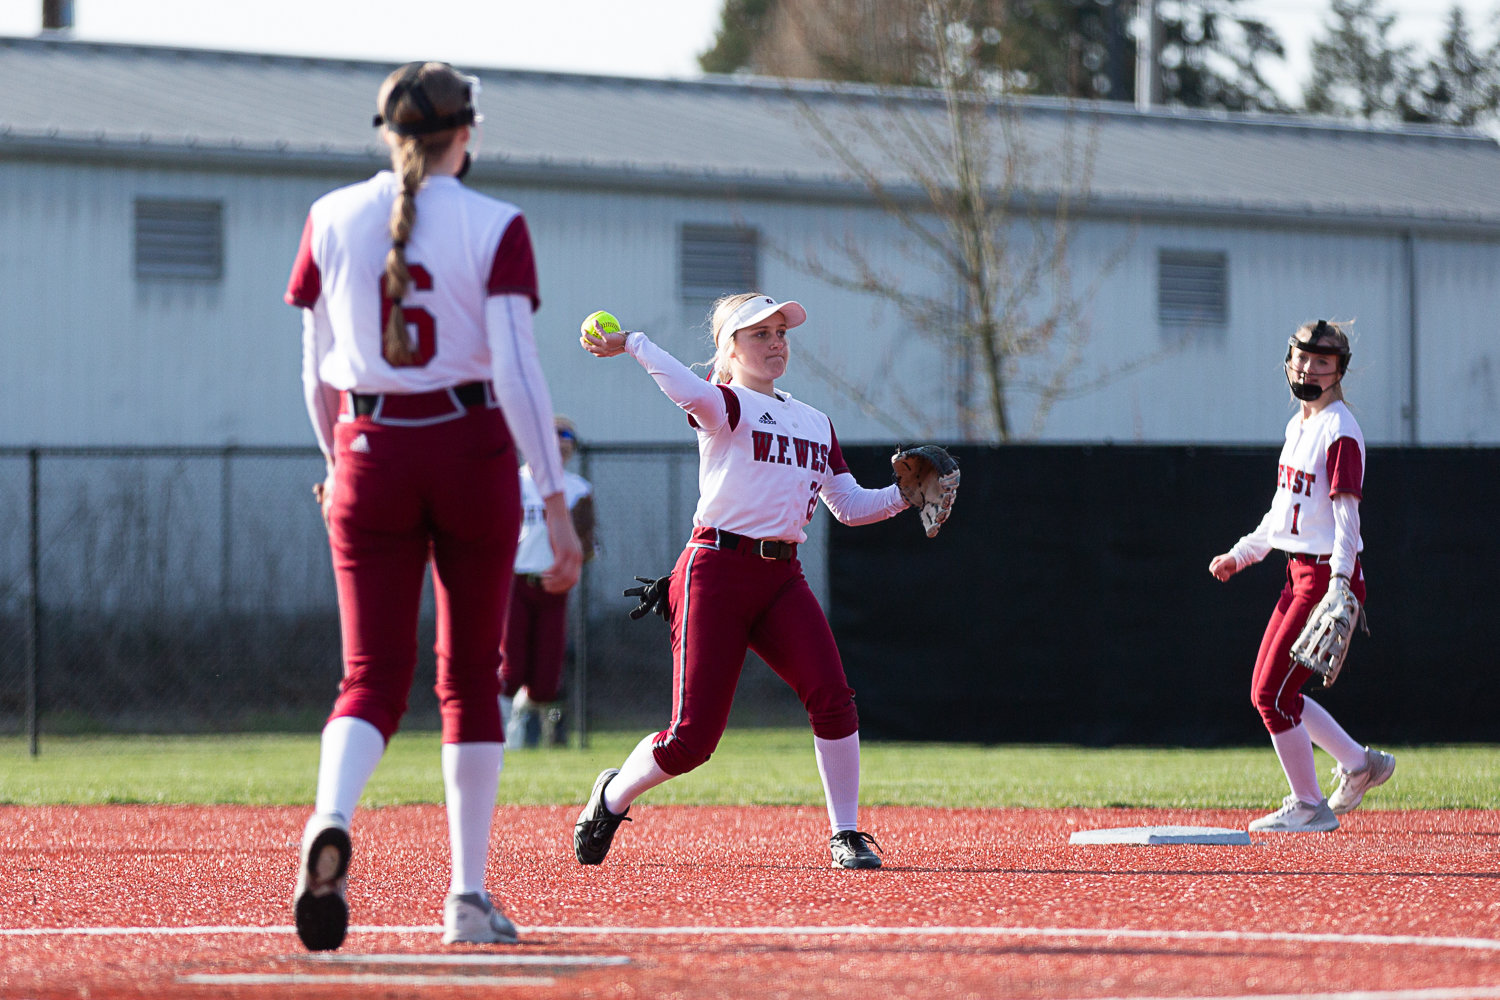 W.F. West shortstop Avalon Myers throws towards first against Timberline March 16 at Rec Park.